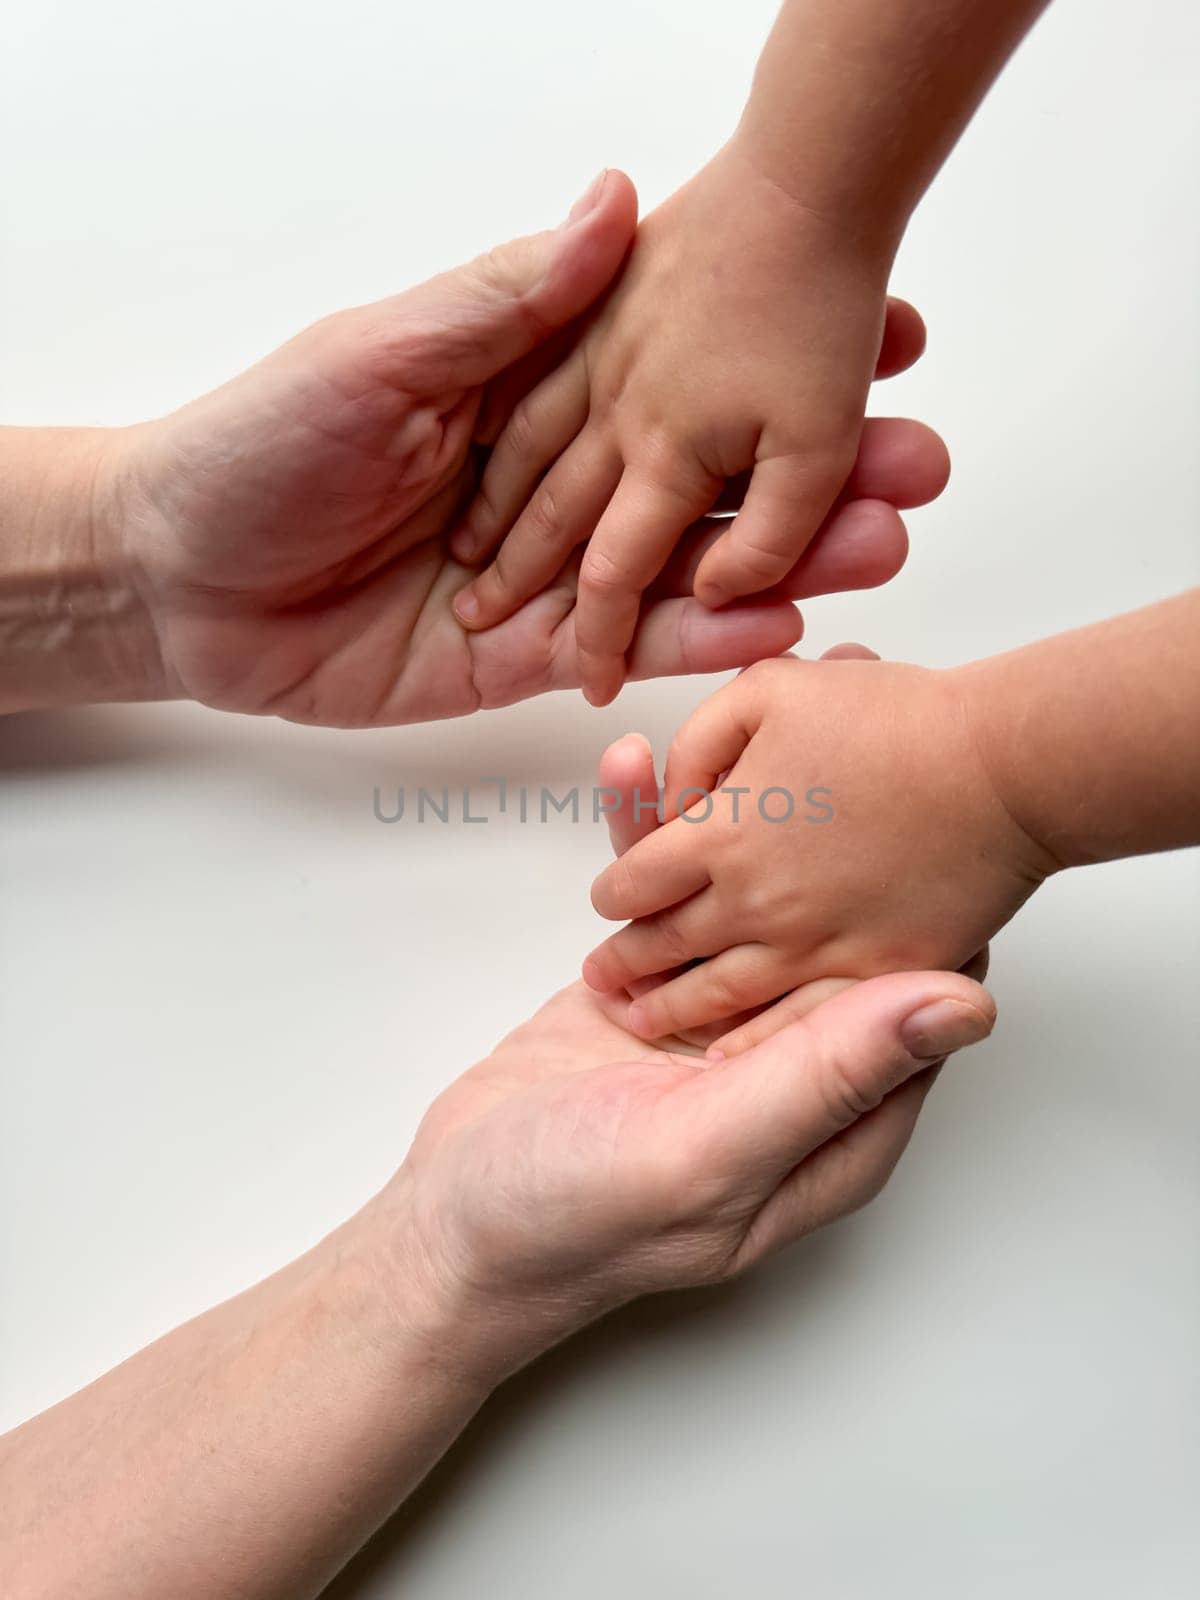 Woman and child, with their fingers intertwined, stand on a white surface. Their gestures express love and unity.